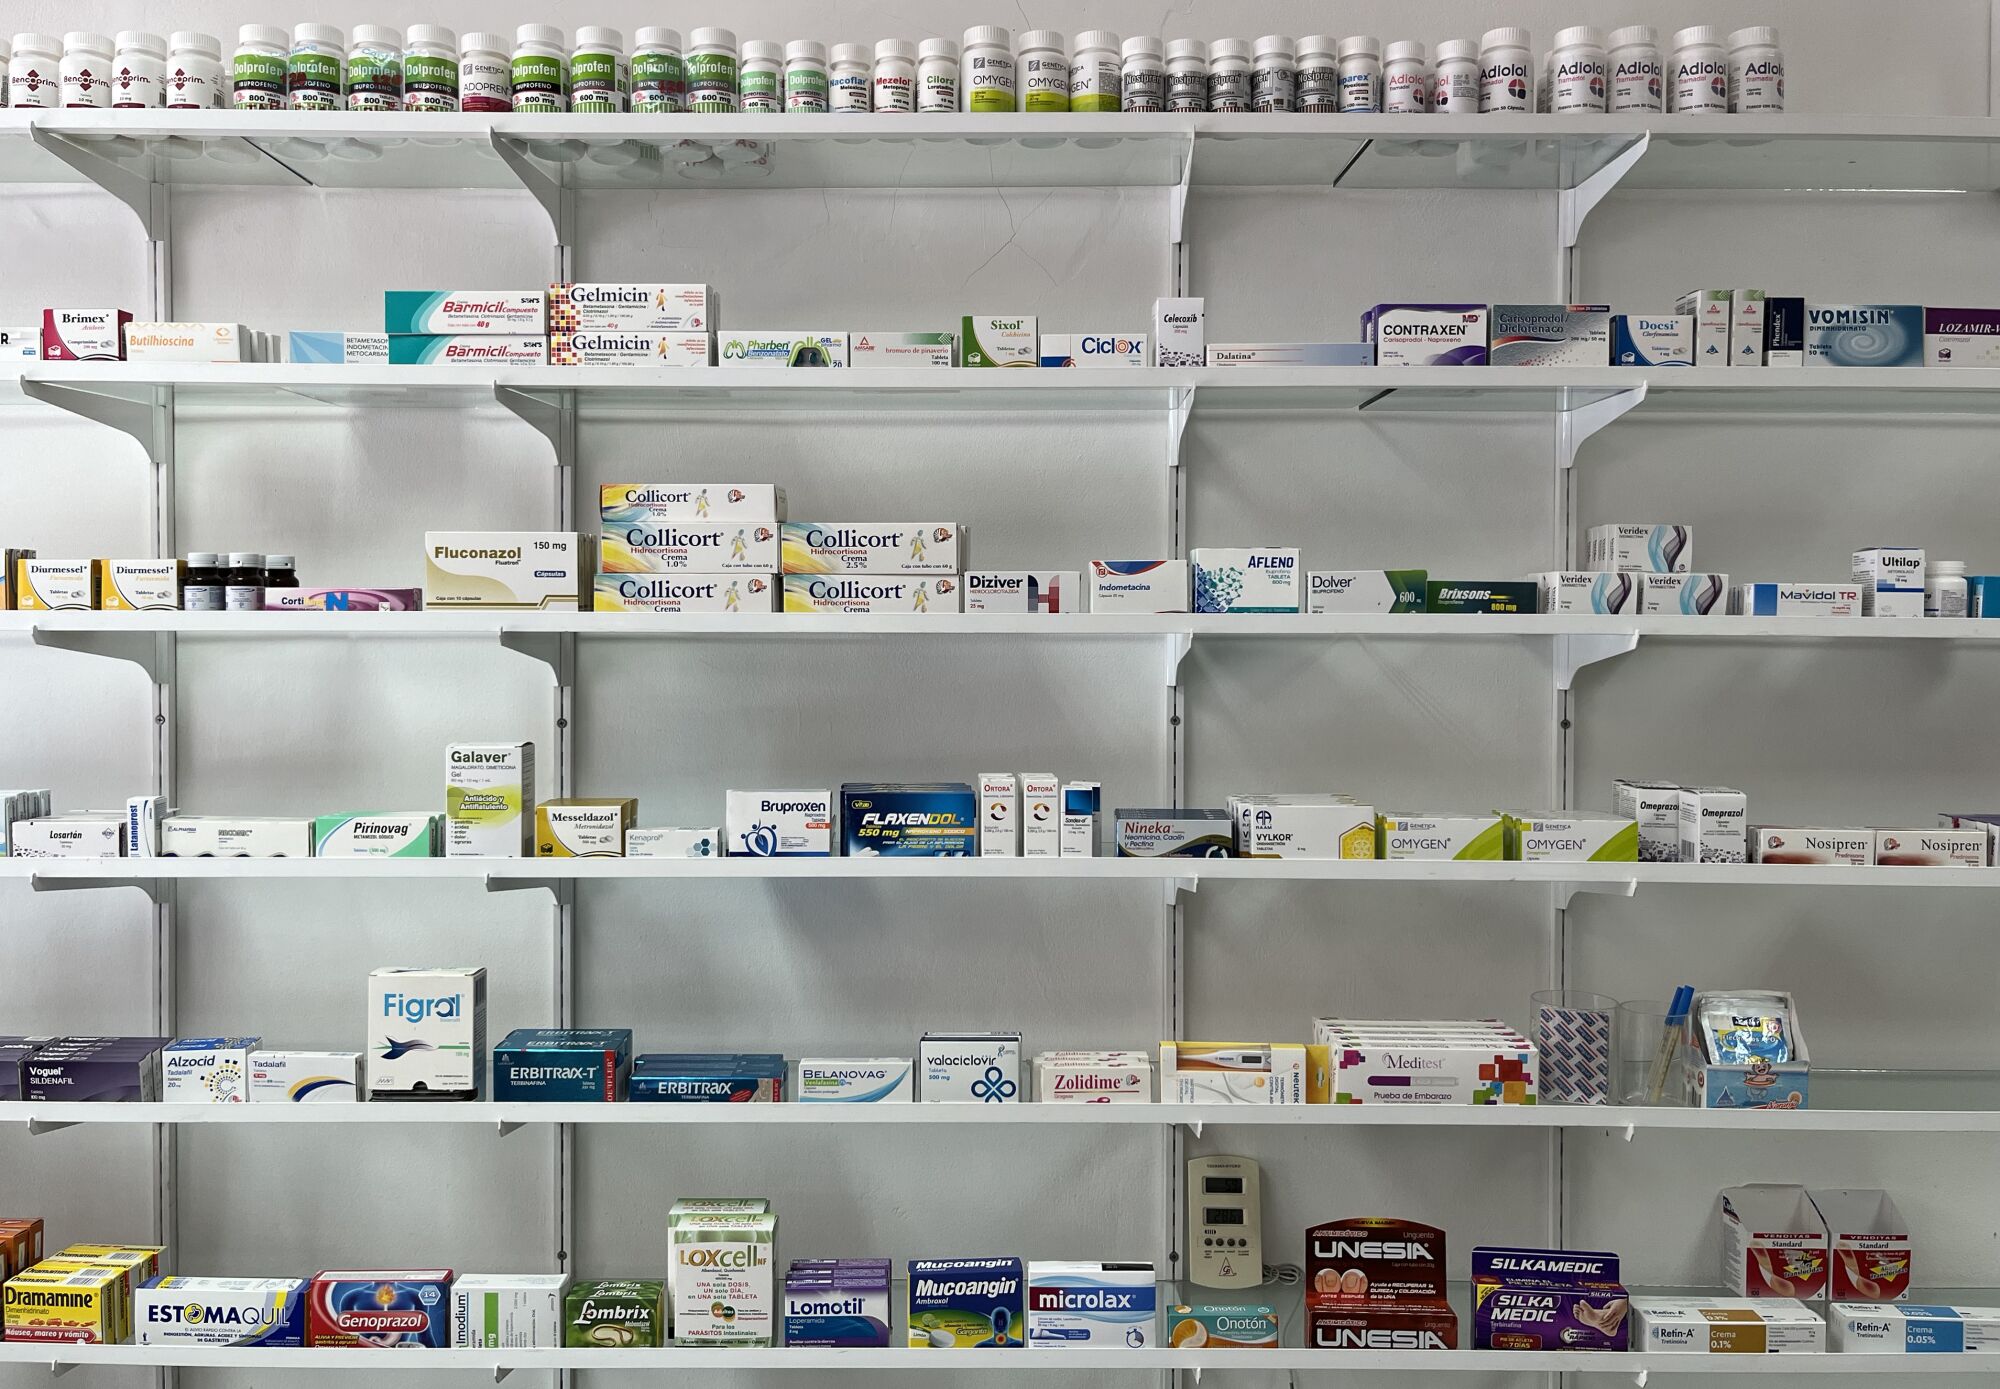 Individual packages of medication line store shelves.